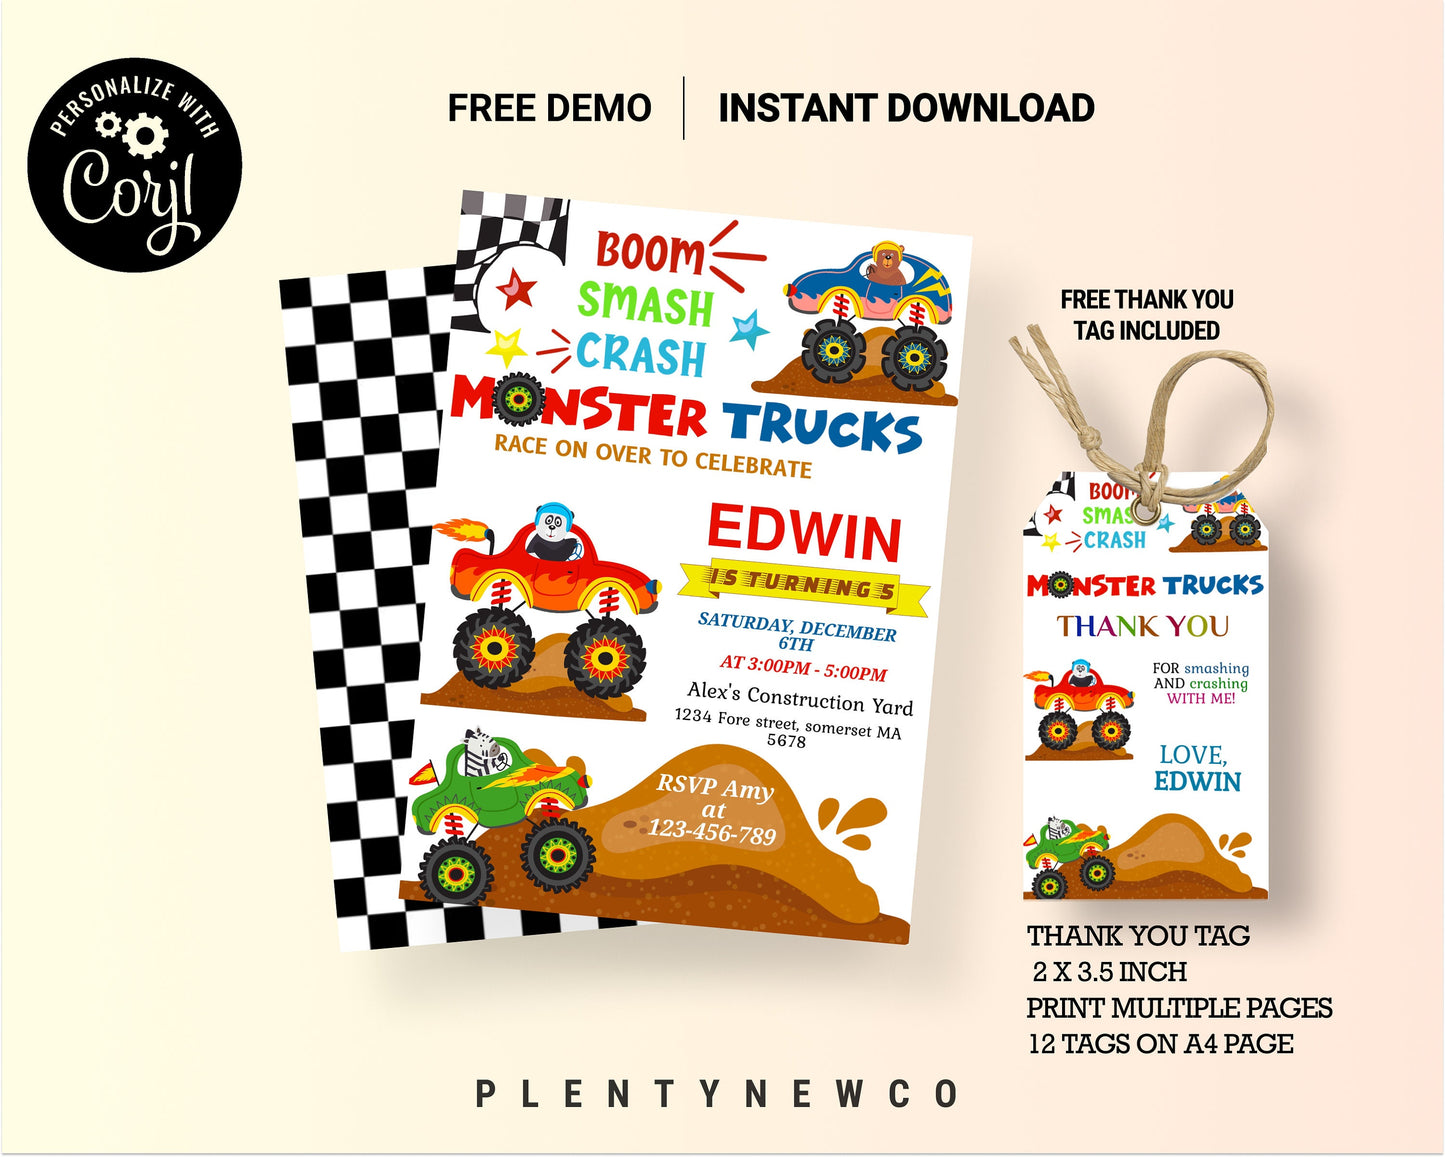 Monster Truck Electronic Invitation Template, Monster Truck Phone Invitation, Monster Truck Editable Electronic Invitation Monster Truck MT